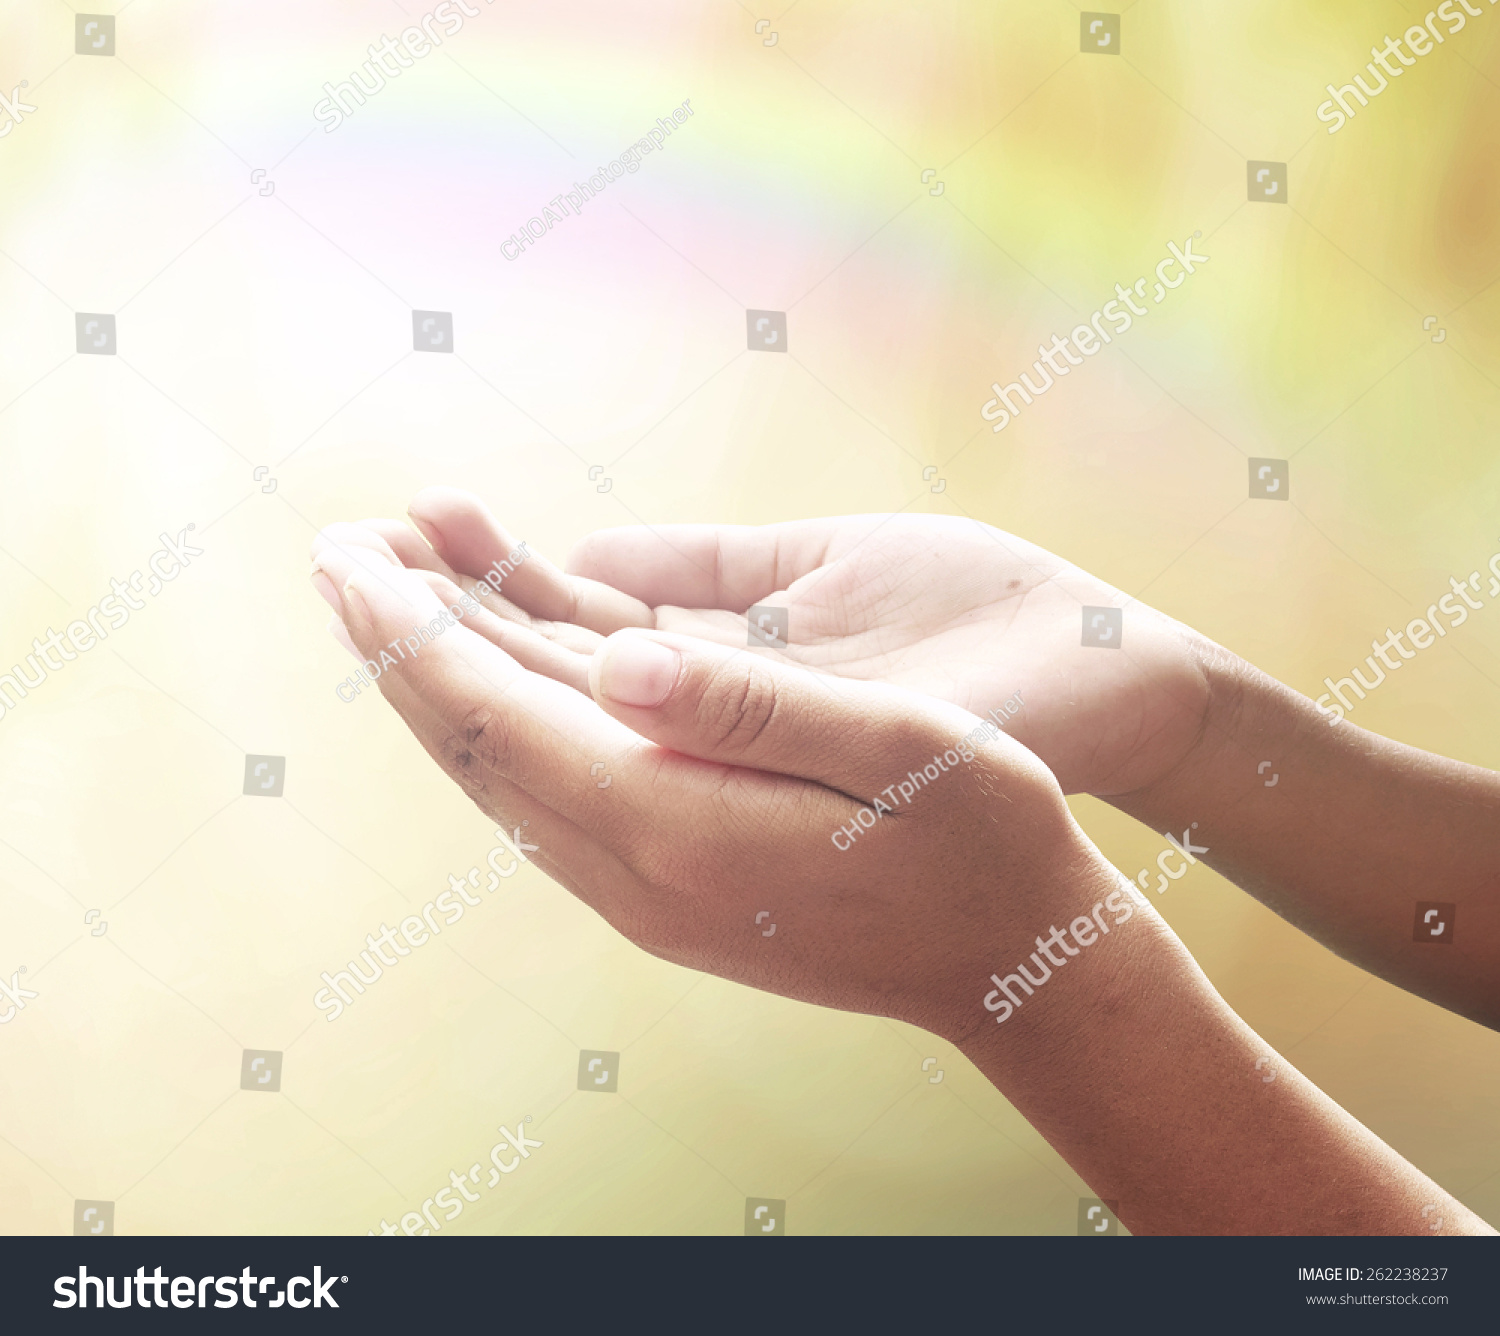 Offering concept: Human open two empty hands with palms up over blurred rainbow nature background #262238237